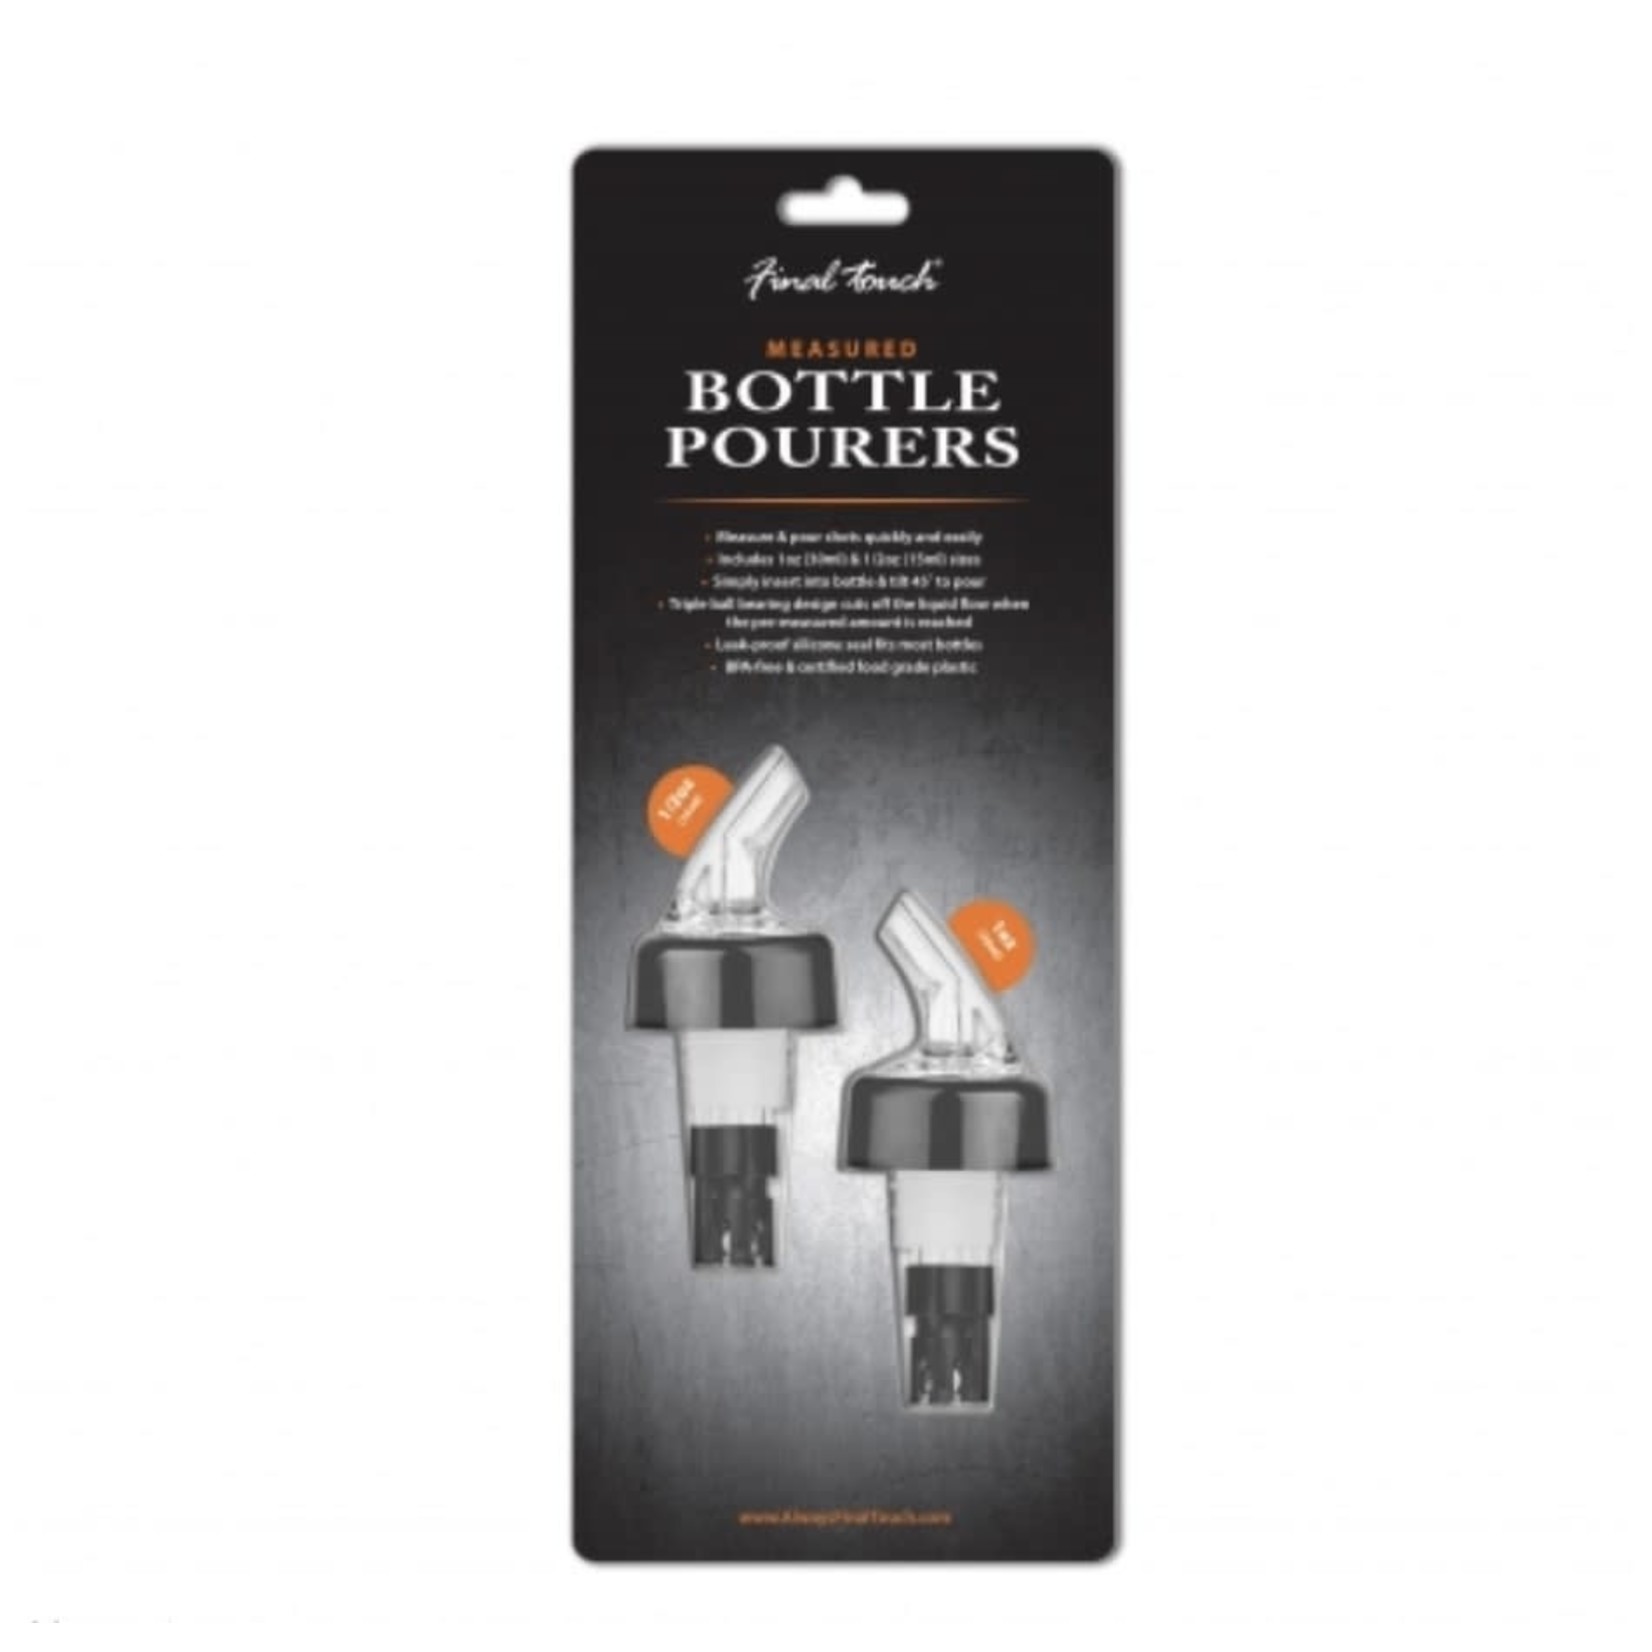 FINAL TOUCH FINAL TOUCH Measured Bottle Pourer S/2